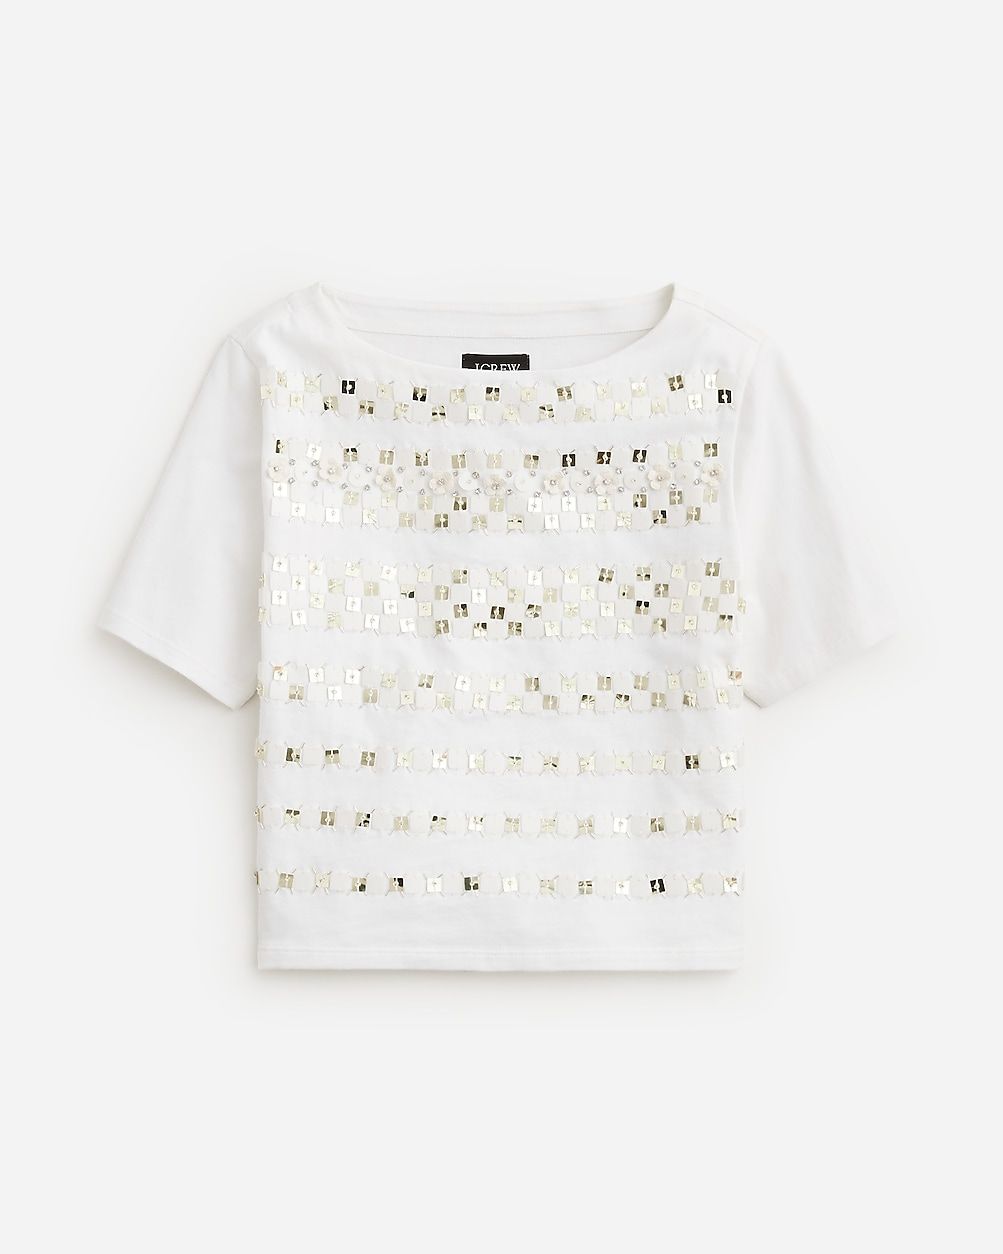 Limited-edition embellished T-shirt with floral appliqués | J.Crew US